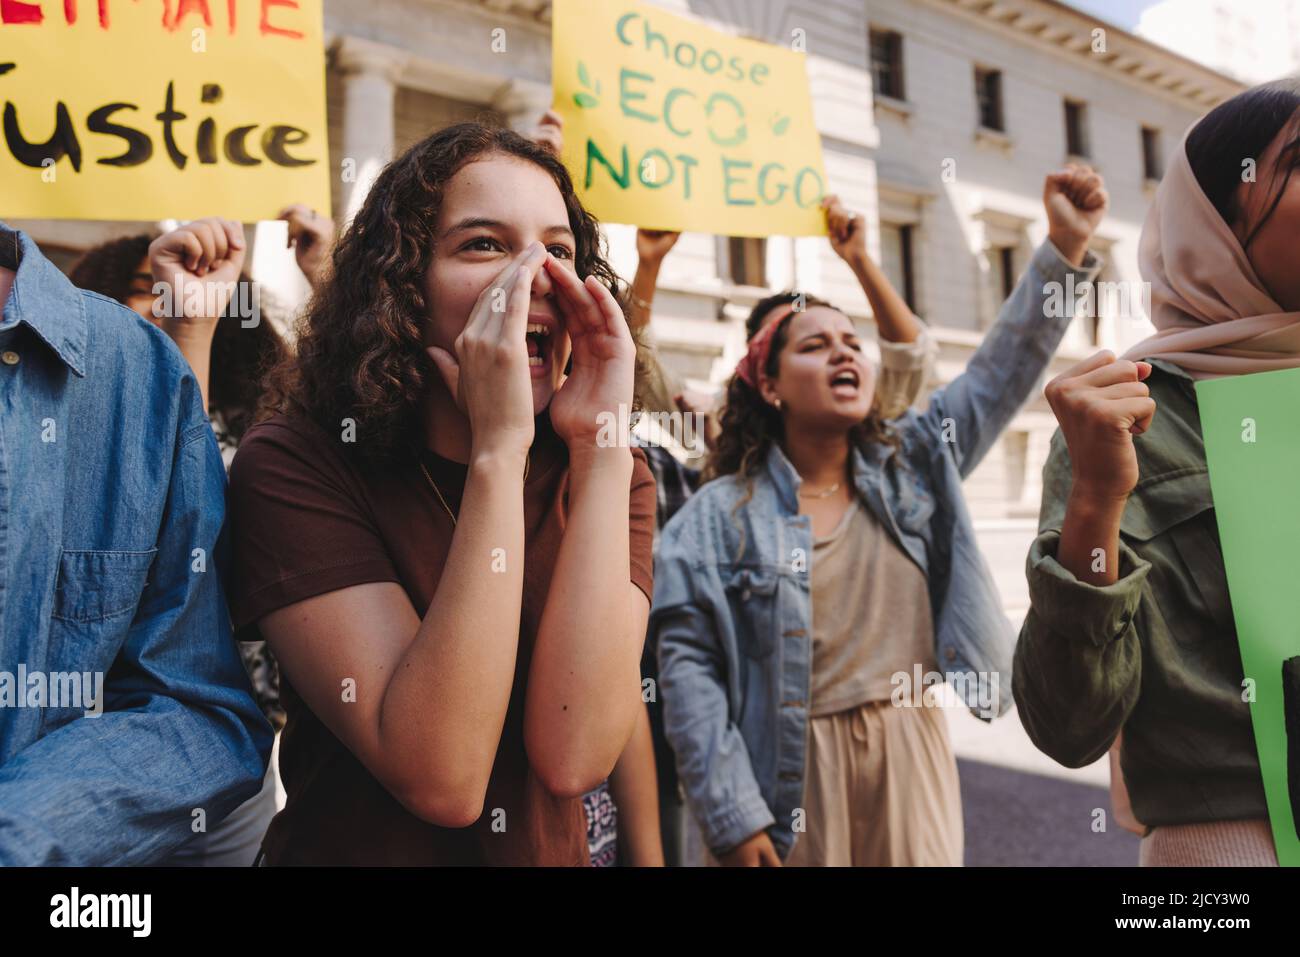 Vibrant climate change activists raising banners and shouting slogans while protesting in the city. Group of multicultural young people marching for c Stock Photo